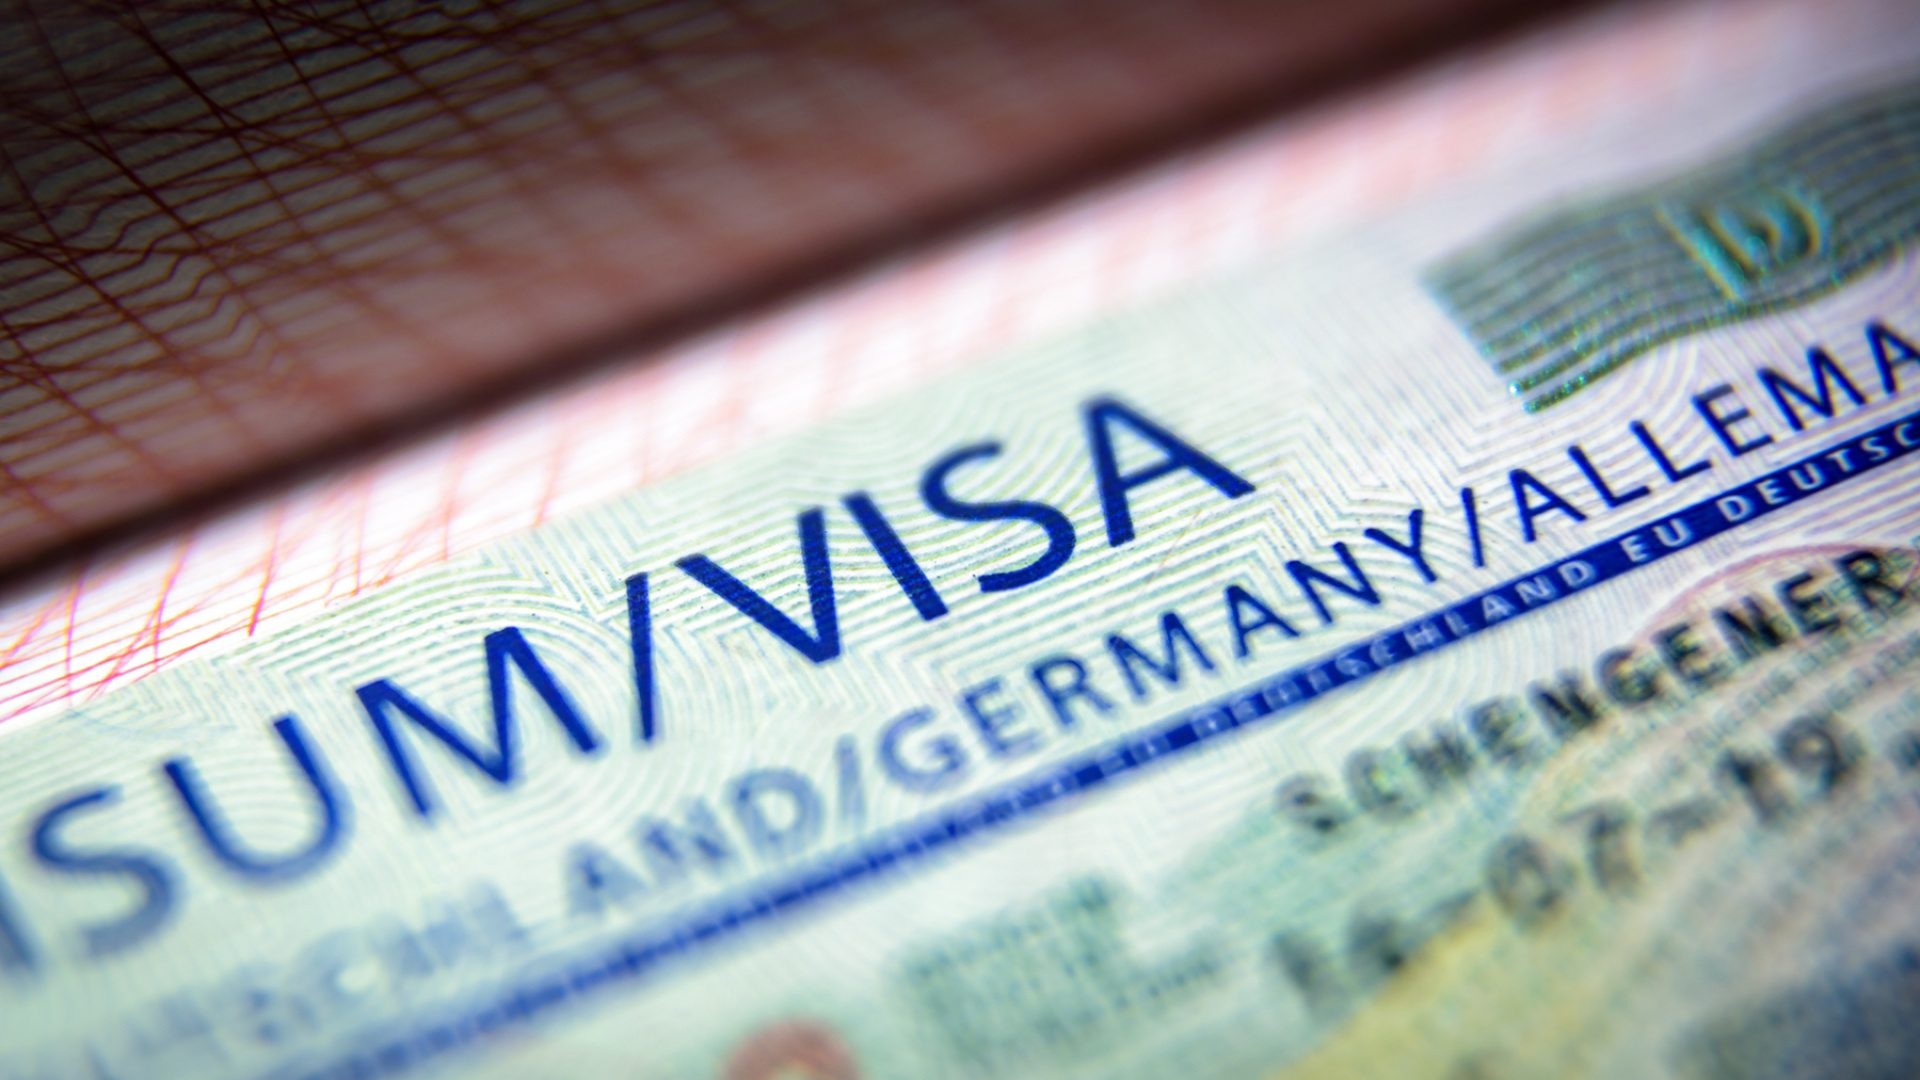 Travel Visa: Immigration in Germany, Business type, for engaging in commerce in the country. 1920x1080 Full HD Wallpaper.